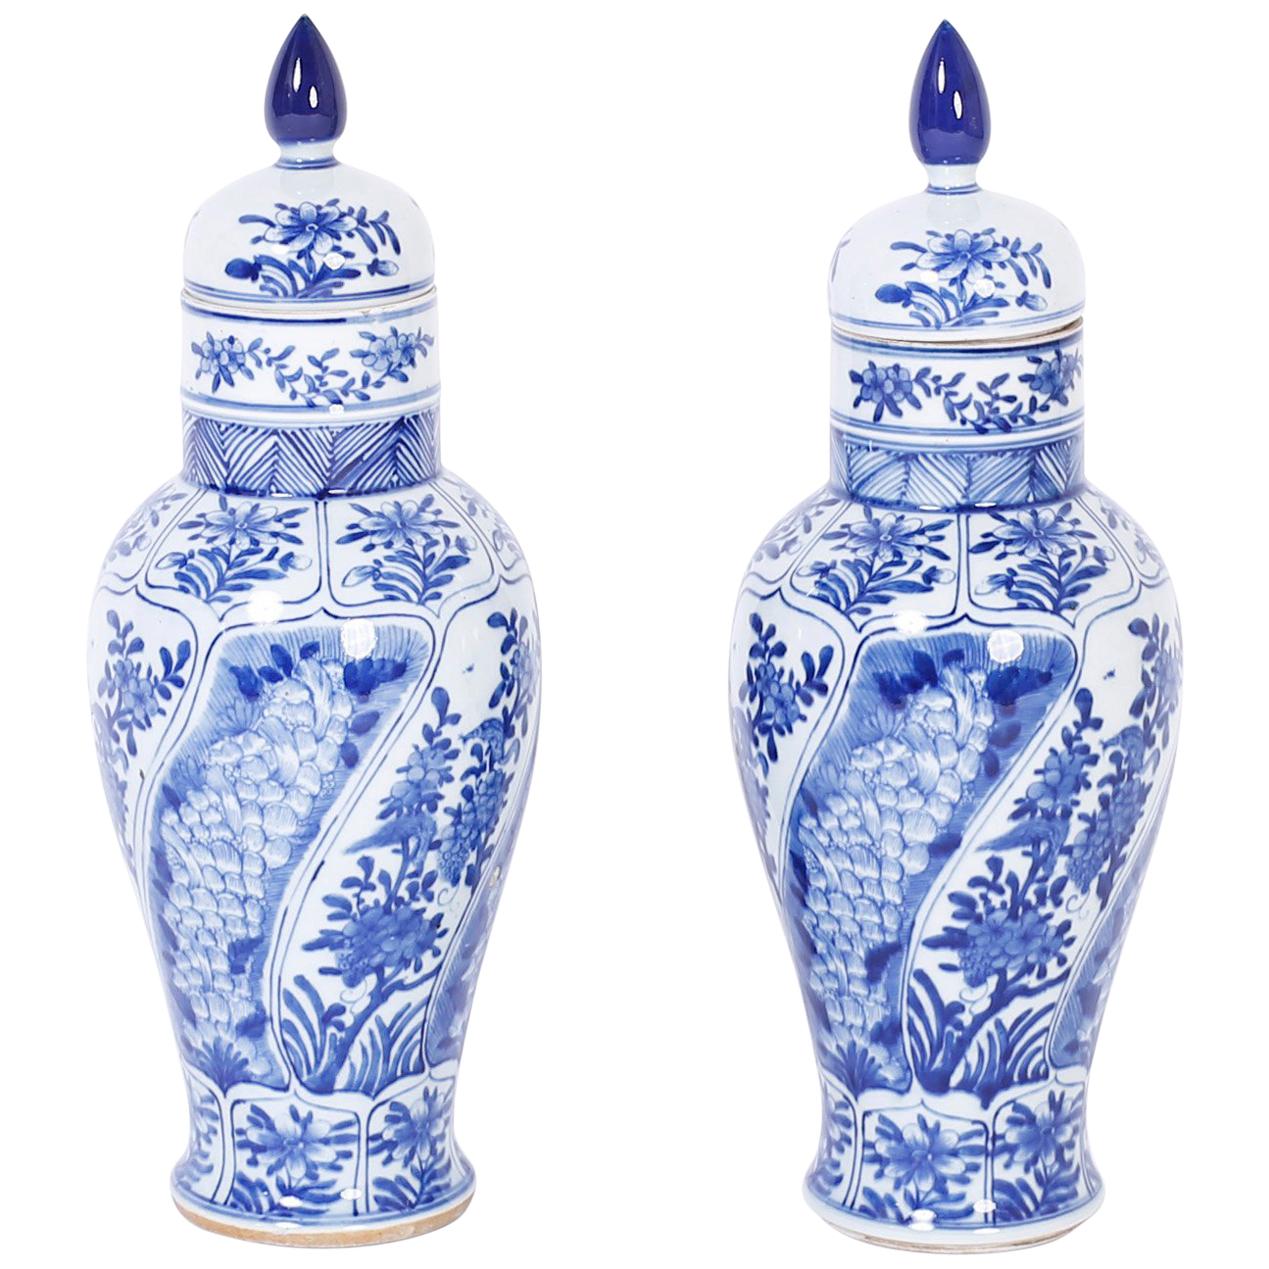 Pair of Blue and White Chinese Porcelain Lidded Urns